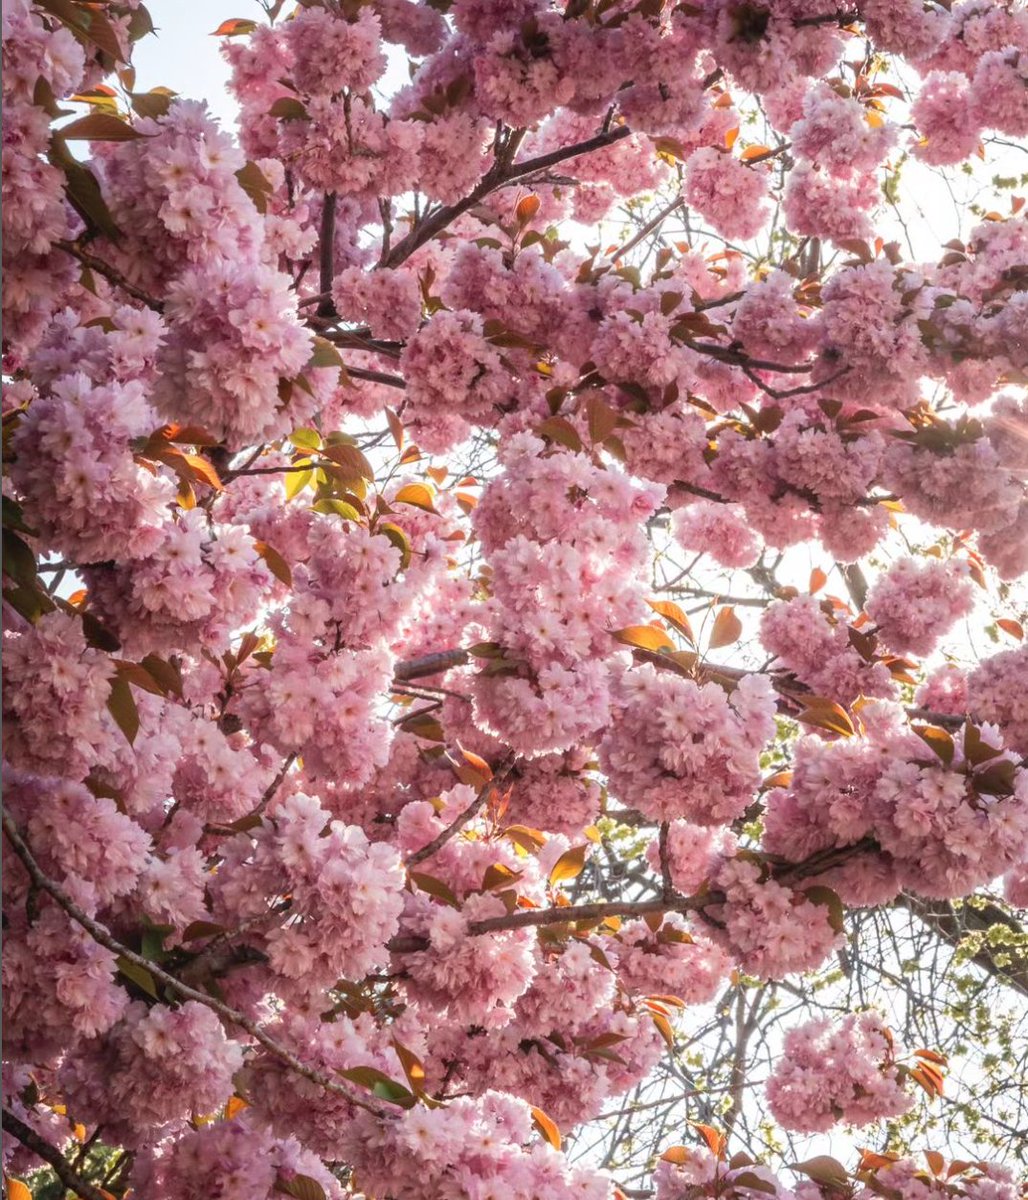 We wish it could be #FlowerFriday all week long! 🌸 What are your favorite blooms in Prospect Park? Let us know + visit Prospect Park Alliance’s Spring Bloom Guide to learn more about what’s blooming in Prospect Park + where: prospectpark.org/springblooms